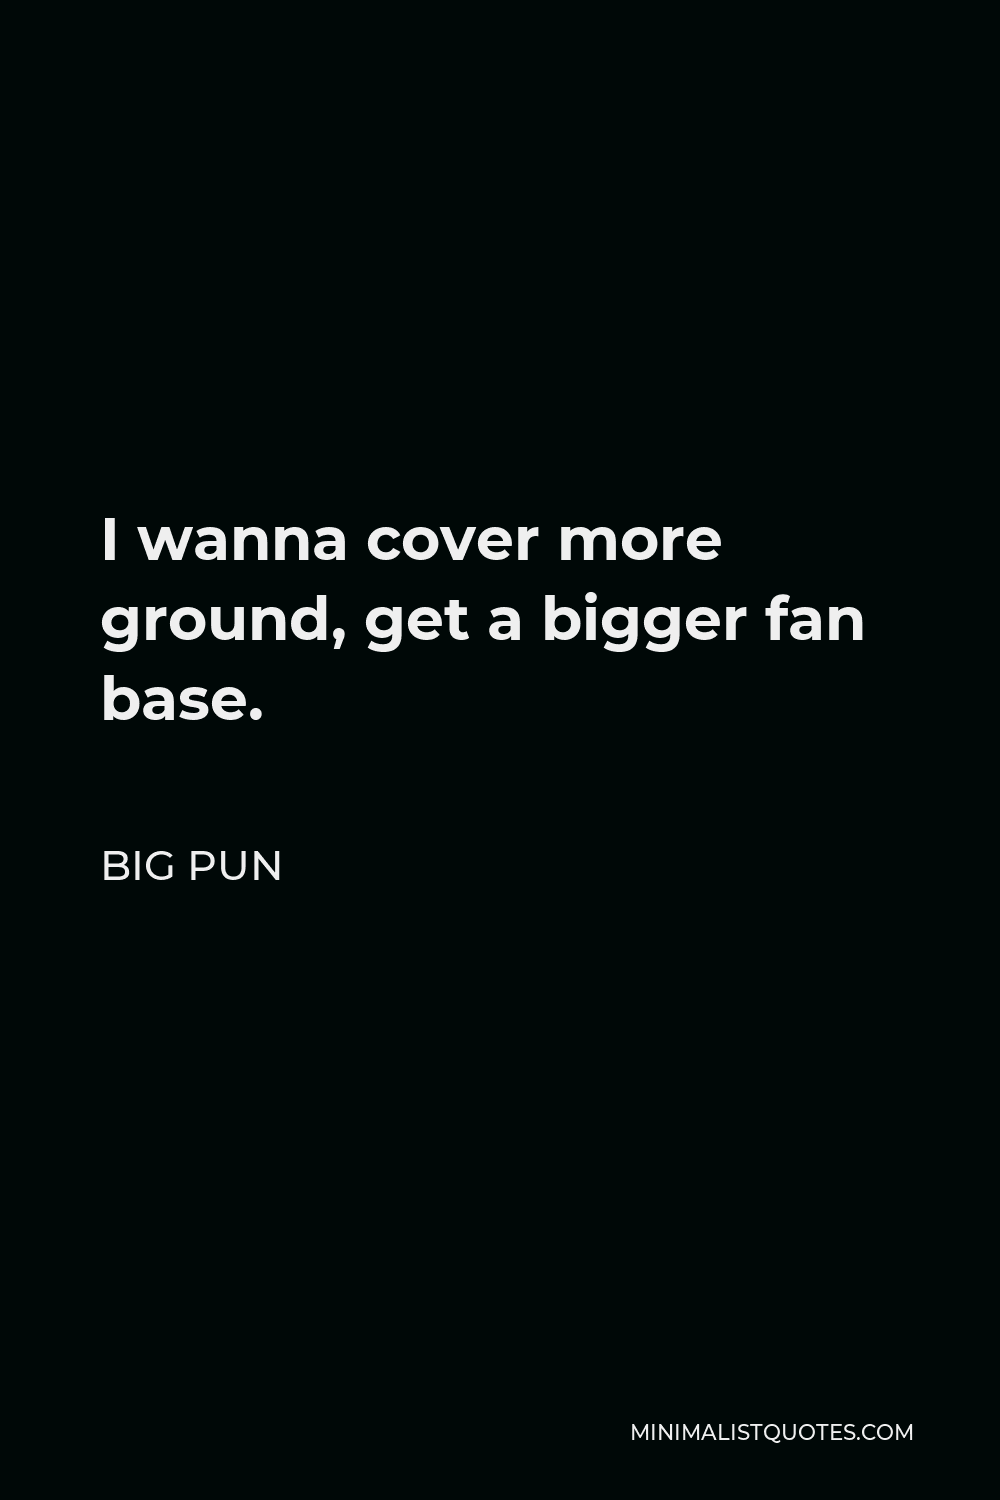 Big Pun Quote - I wanna cover more ground, get a bigger fan base.